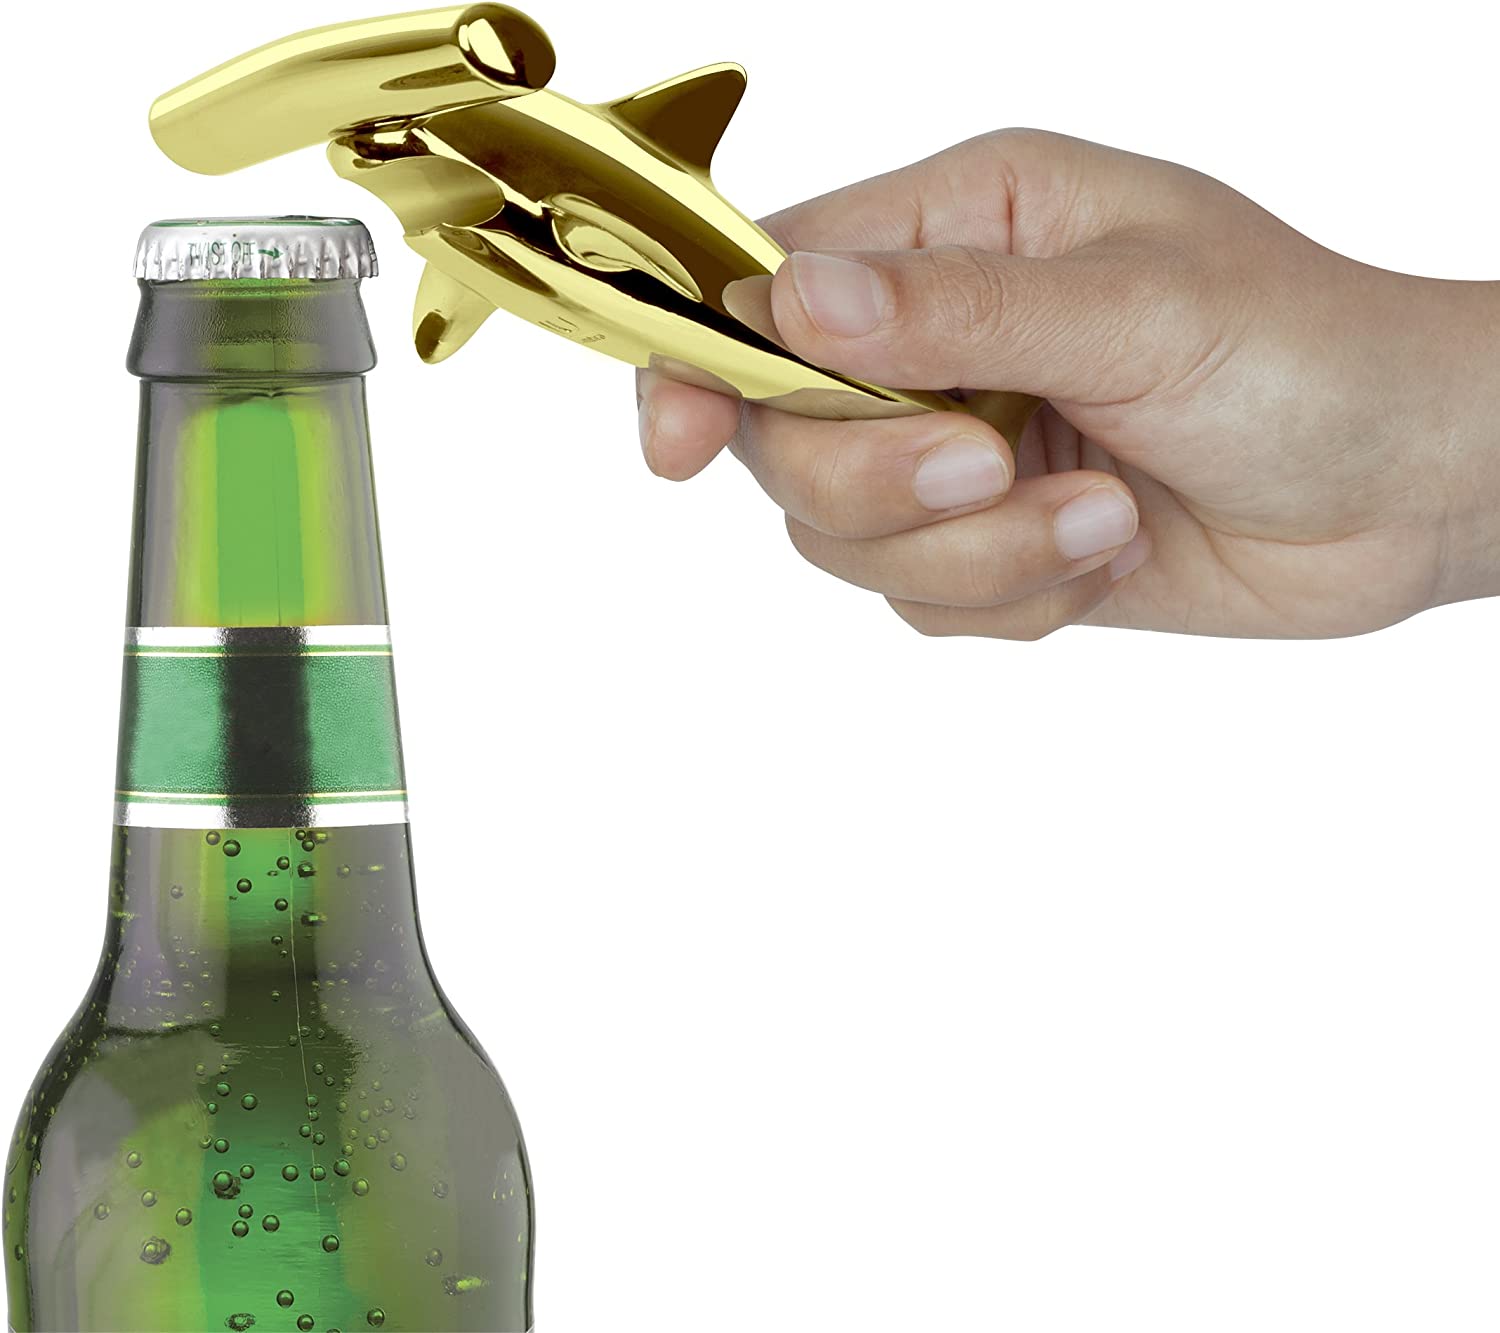 A hand using a brass colored hammerhead shark shaped bottle opener to open a bottle of beer.